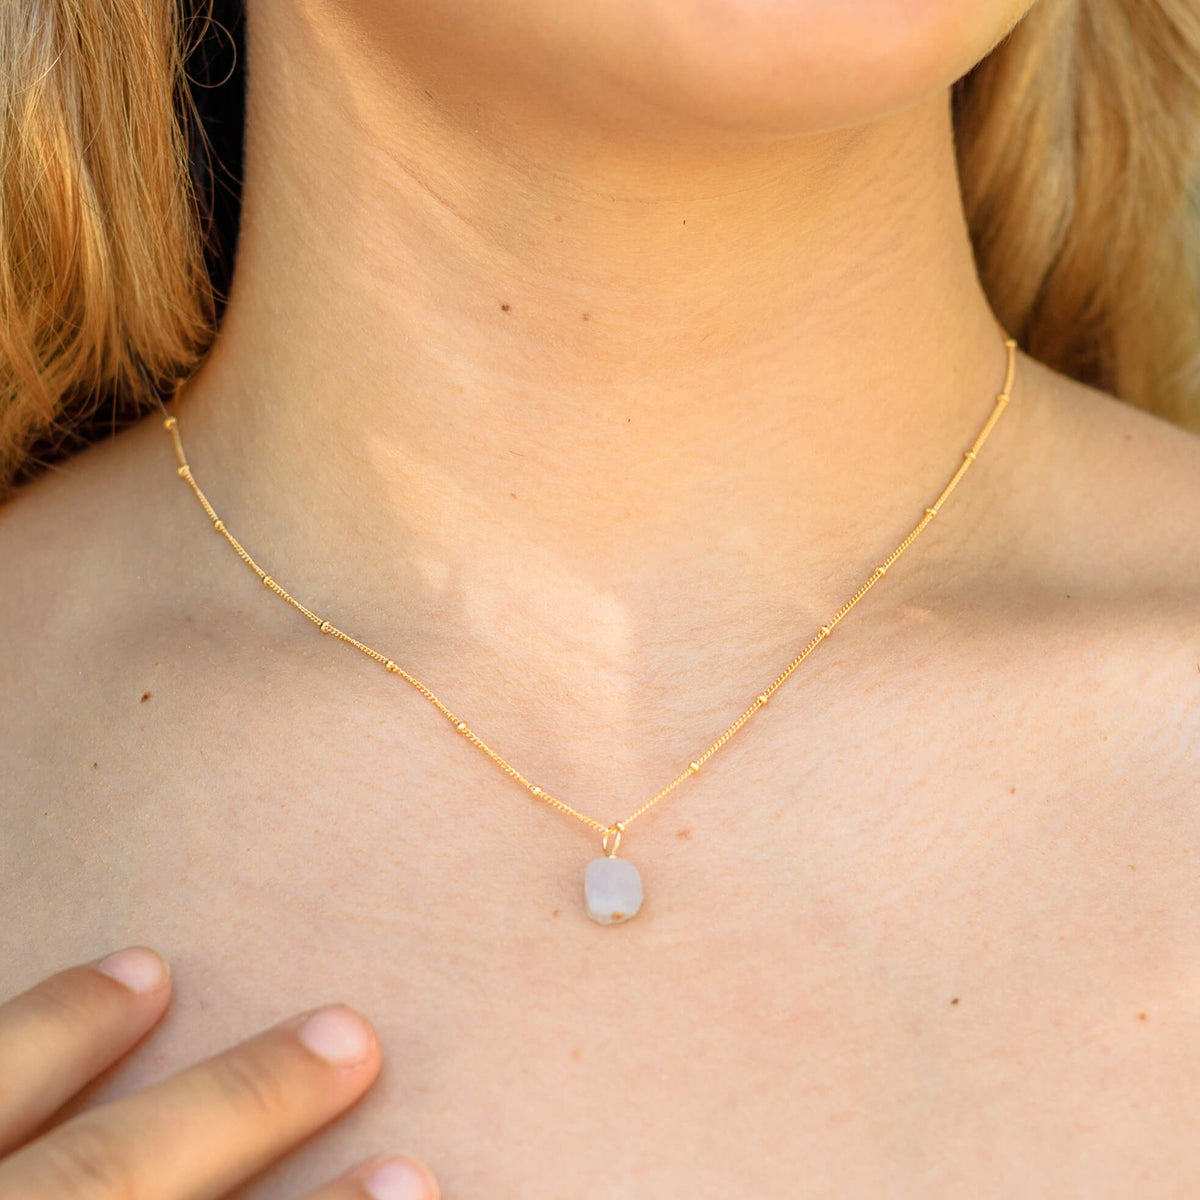 Raw Crystal Pendant Necklace - Blue Lace Agate - 14K Gold Fill Satellite - Luna Tide Handmade Jewellery